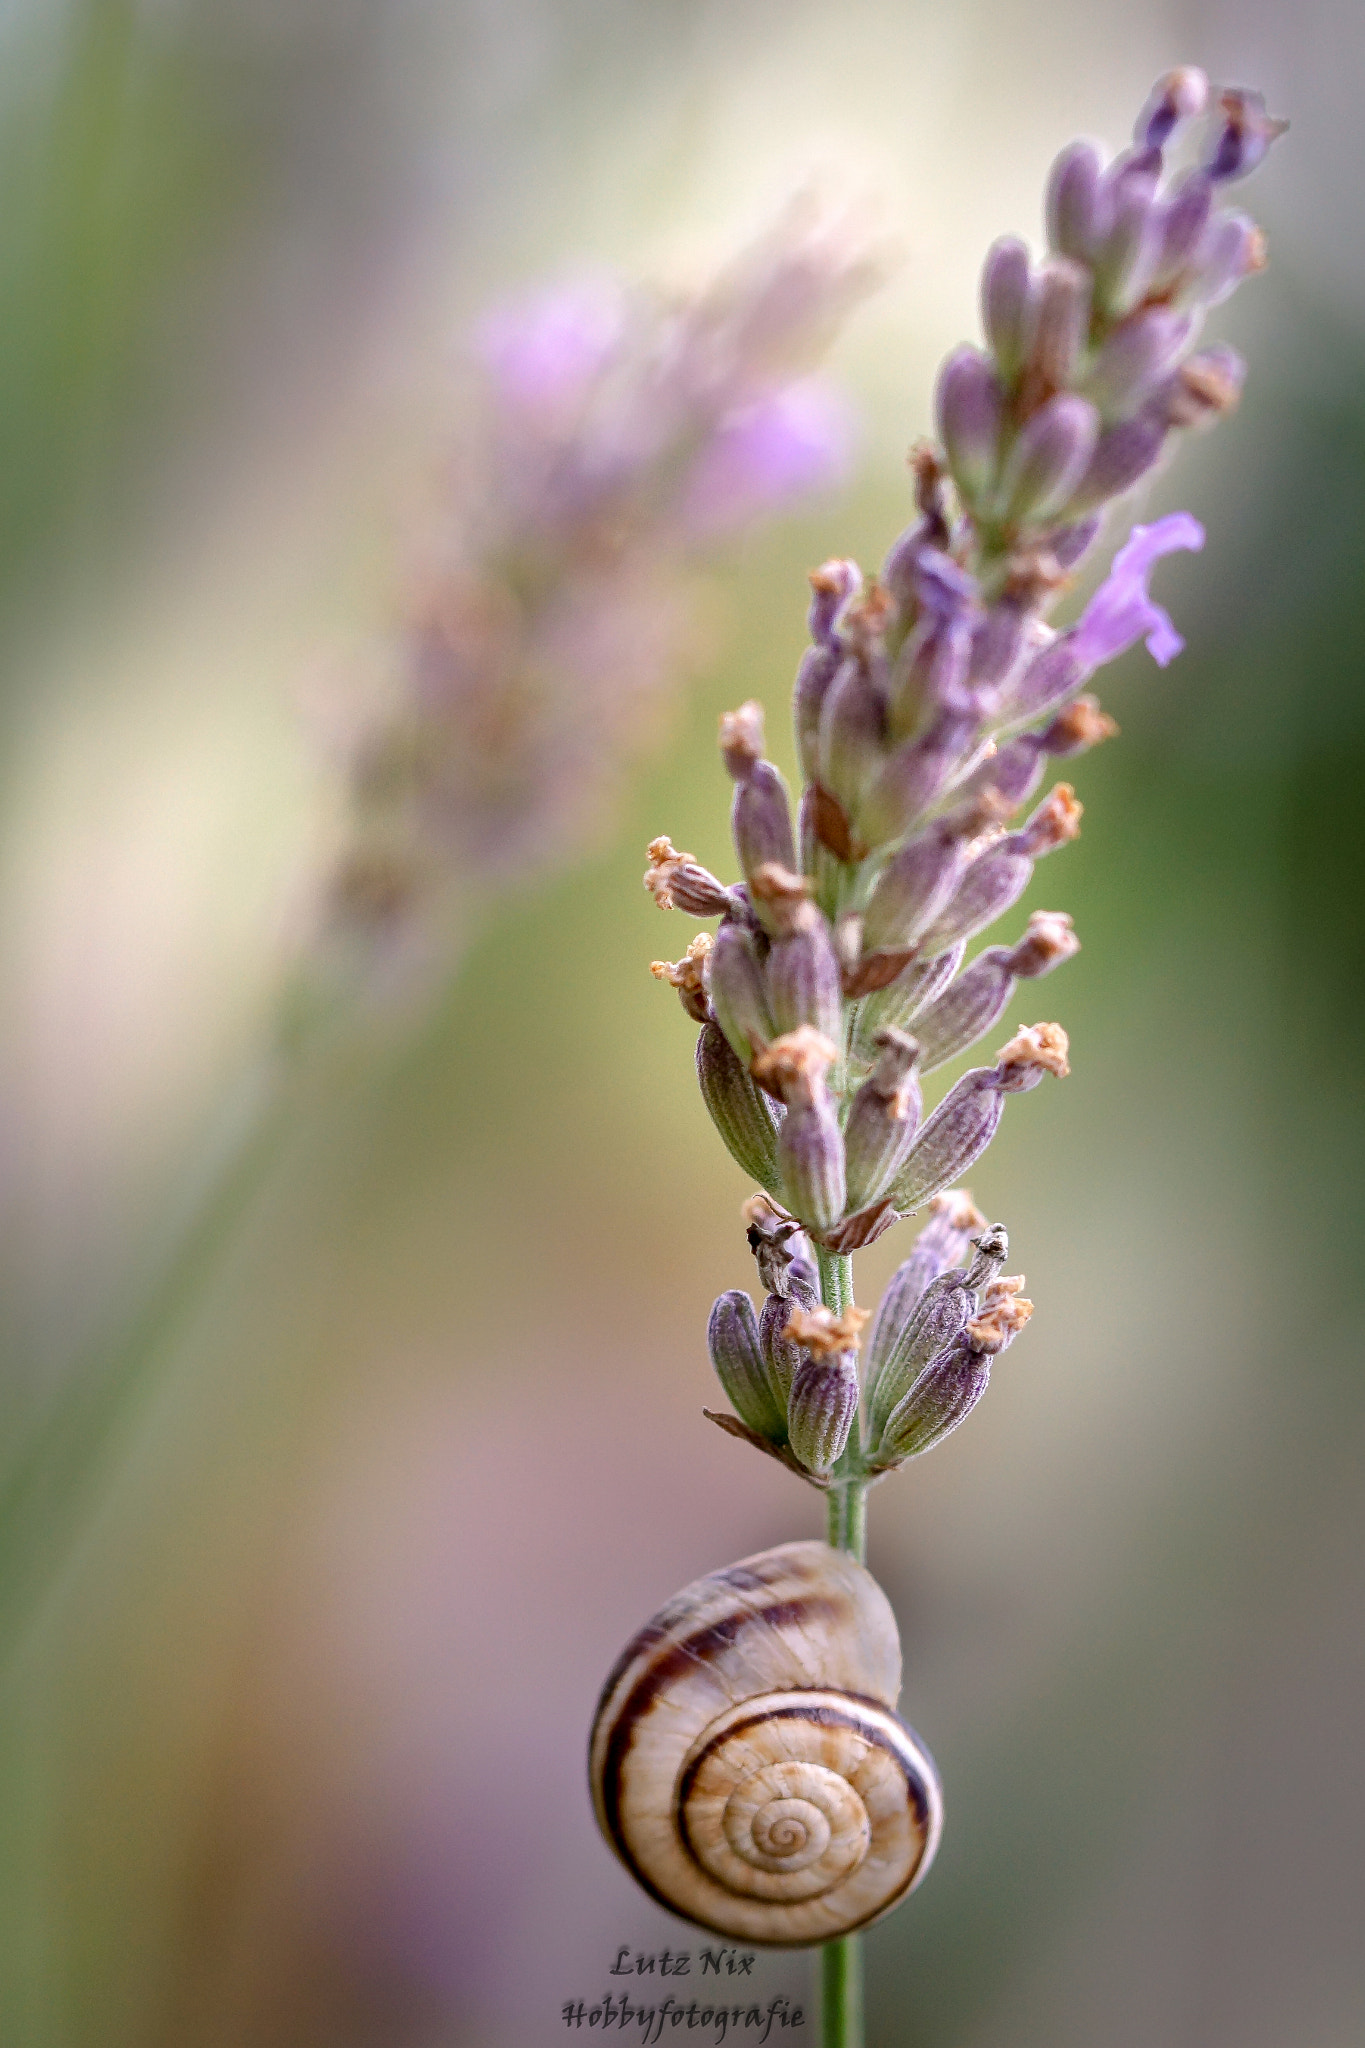 90mm F2.8 Macro SSM sample photo. Still life with snail shell and lavender photography